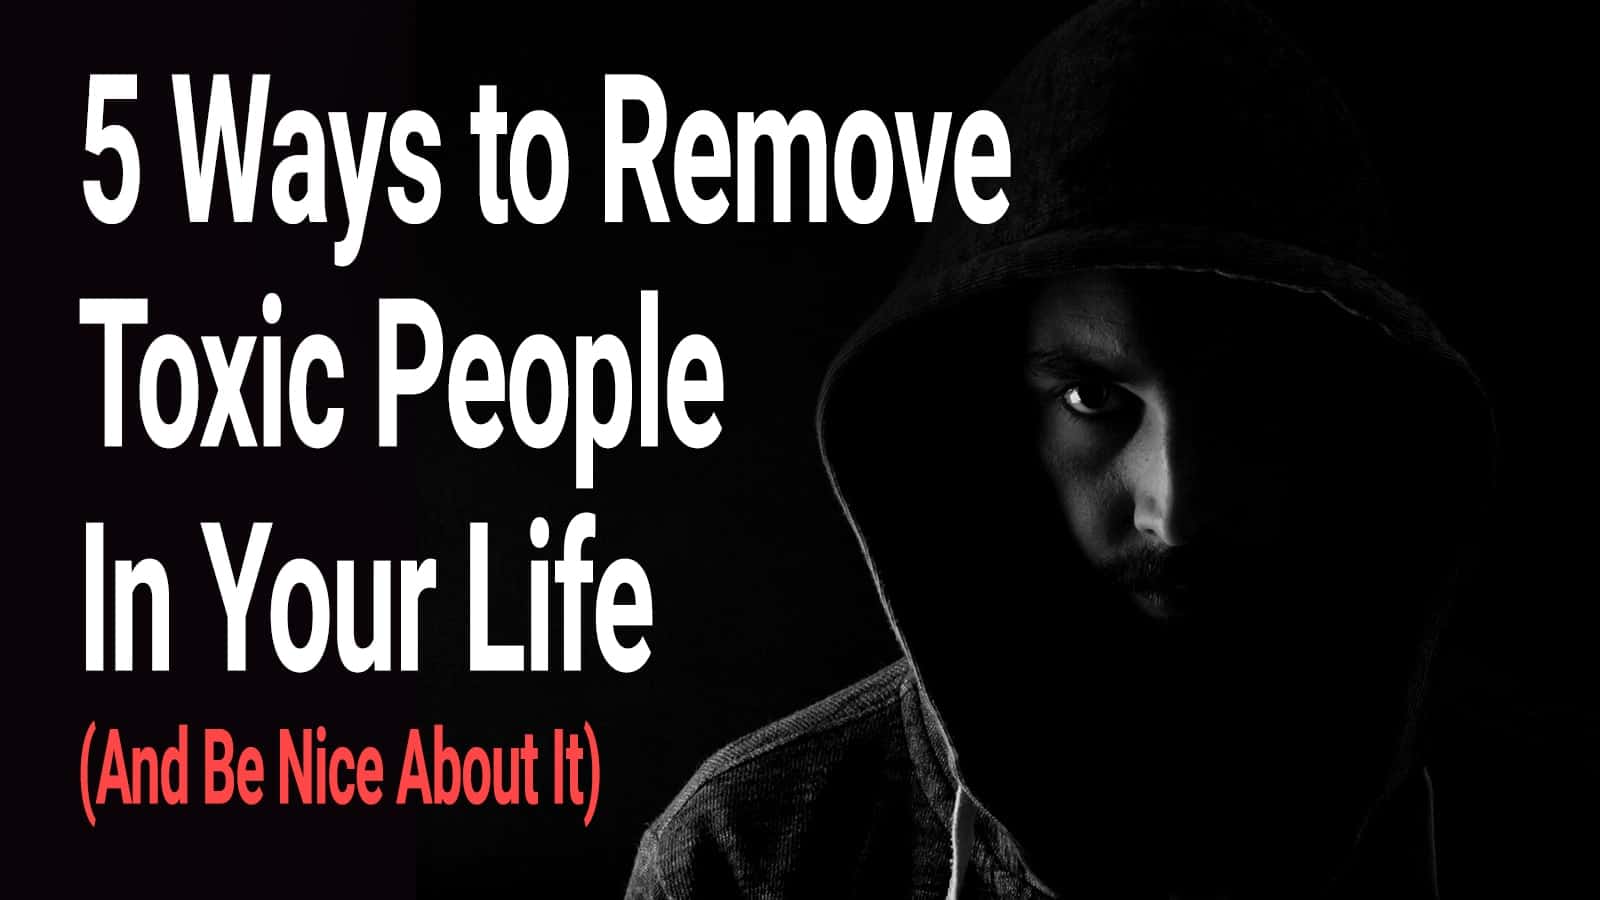 5 Ways to Remove Toxic People In Your Life (And Be Nice About It)